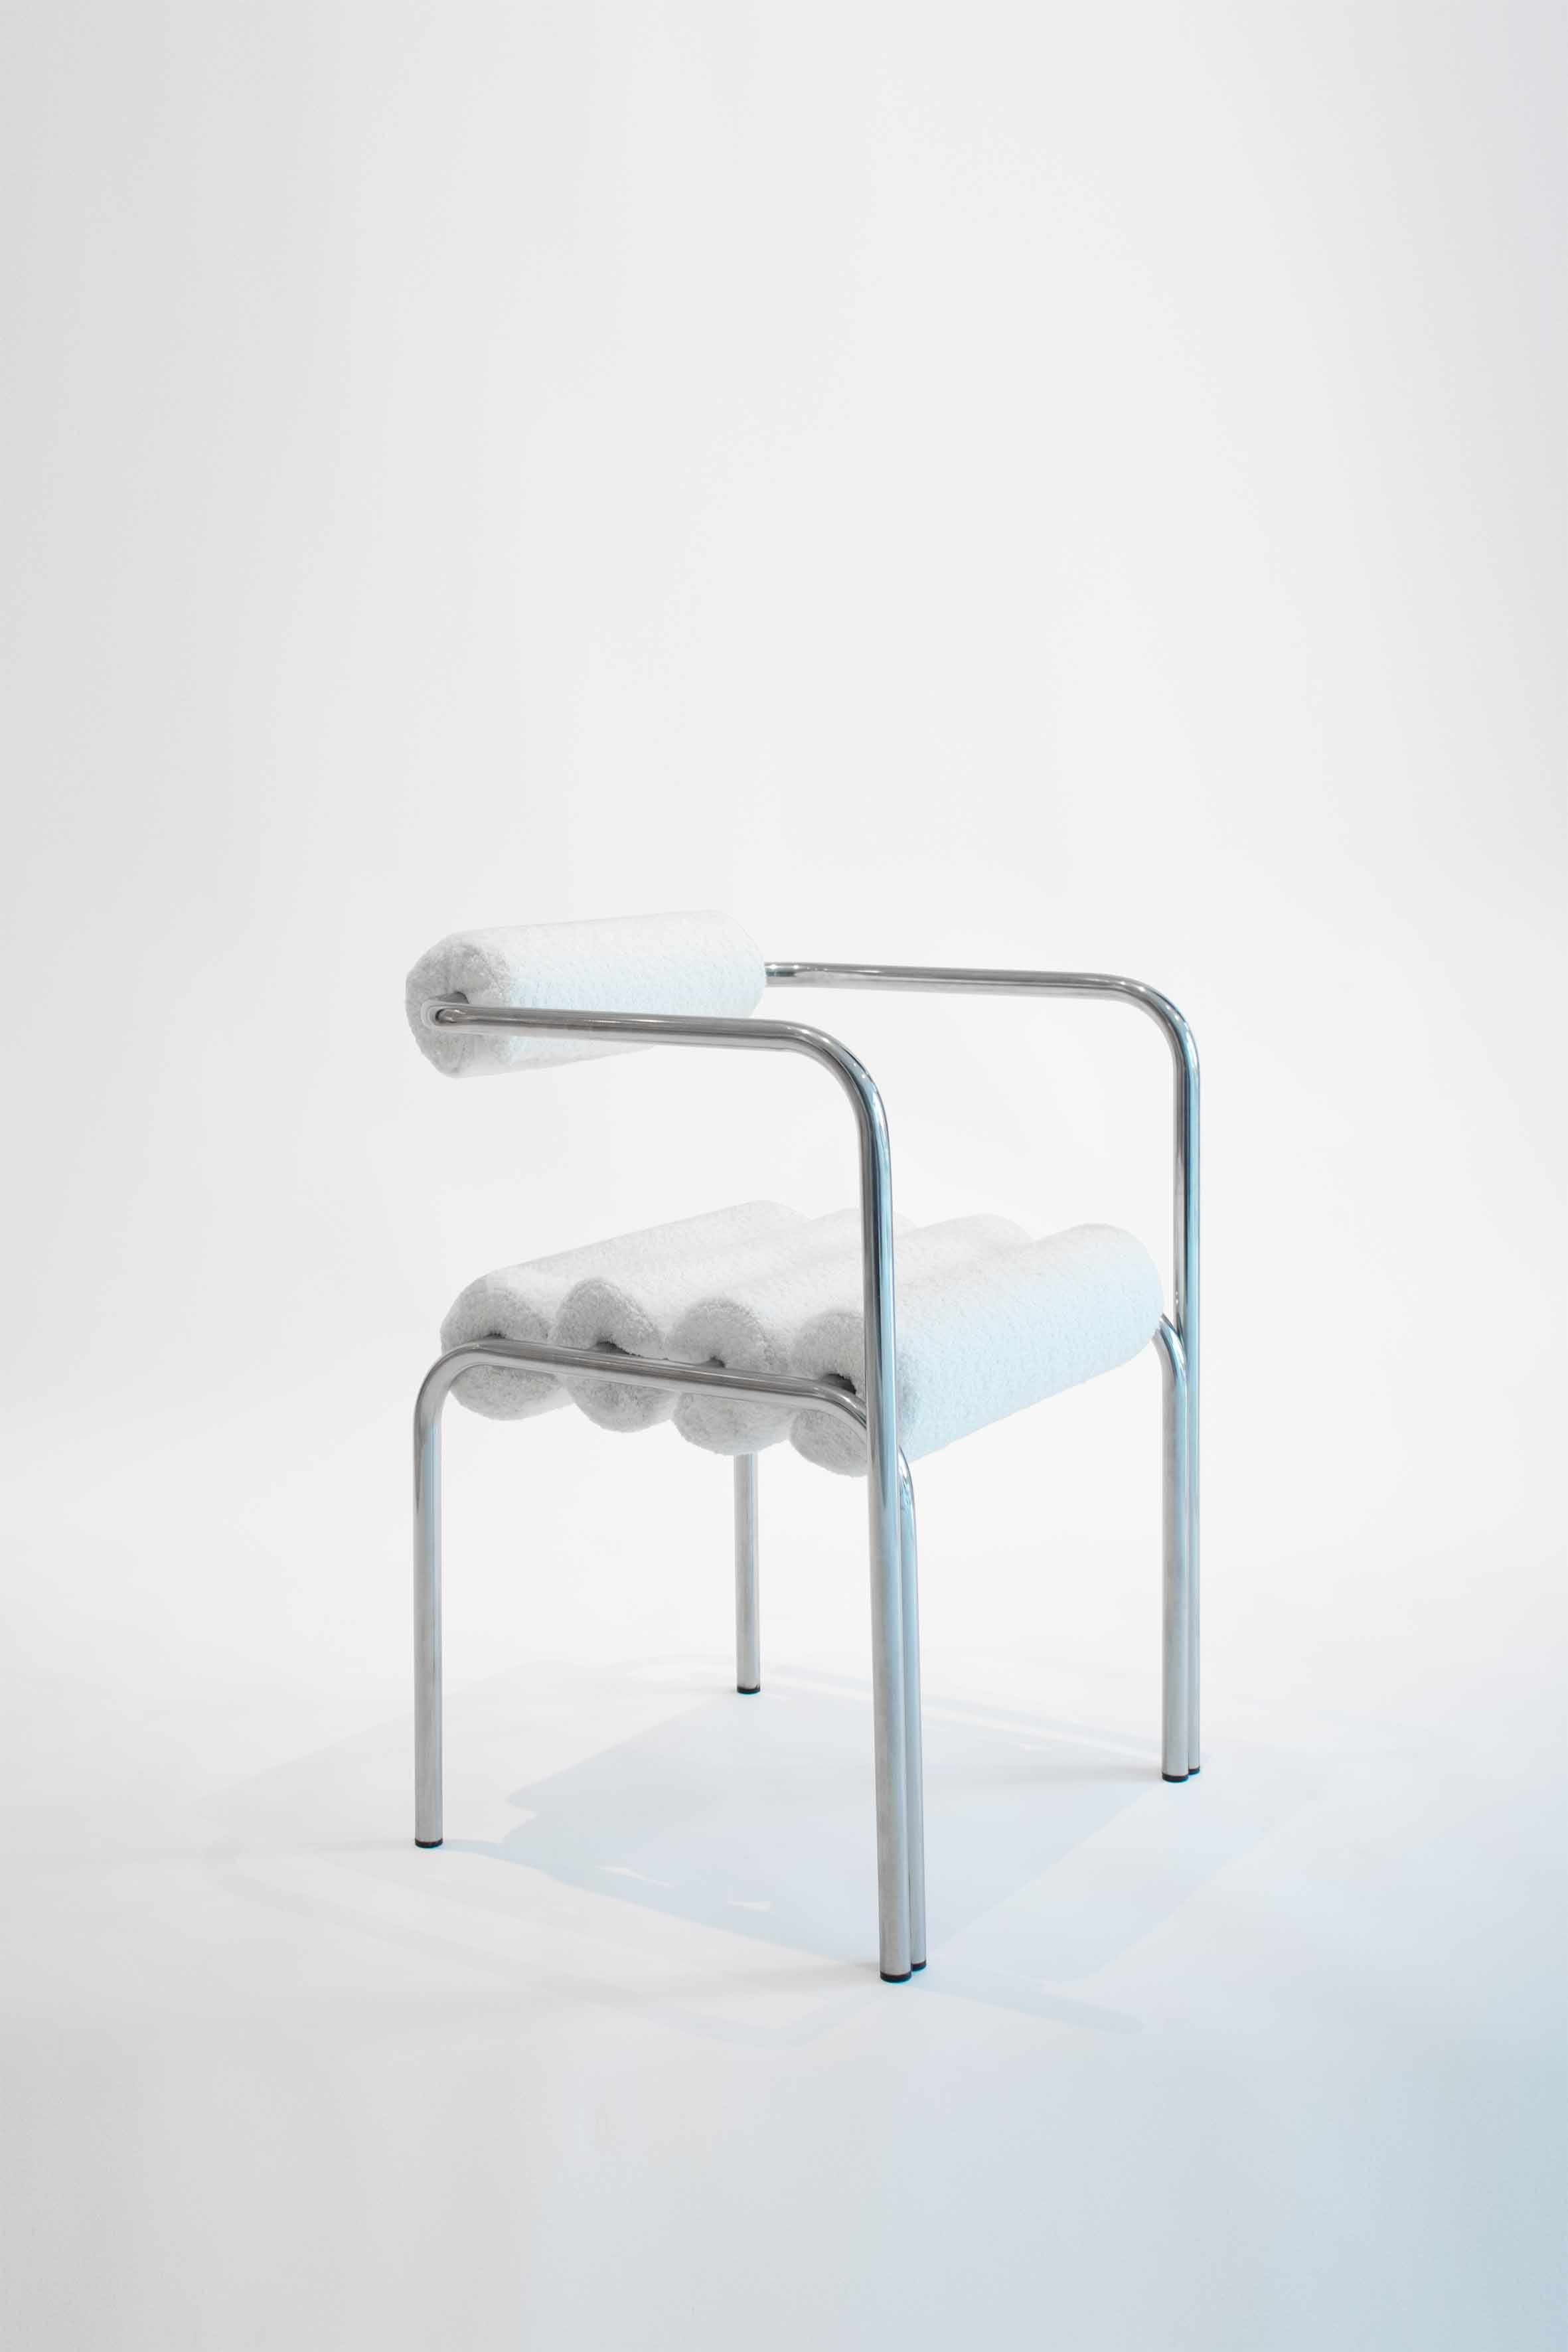 Elegg tubular chair C by Studio Christinekalia
Dimensions: W 50 x D 50 x H 85 cm.
Materials: Stainless steel, bouclé fabric. 

Austere in appearance yet cordial to the human body, this chair design follows the metallic path of its tubular